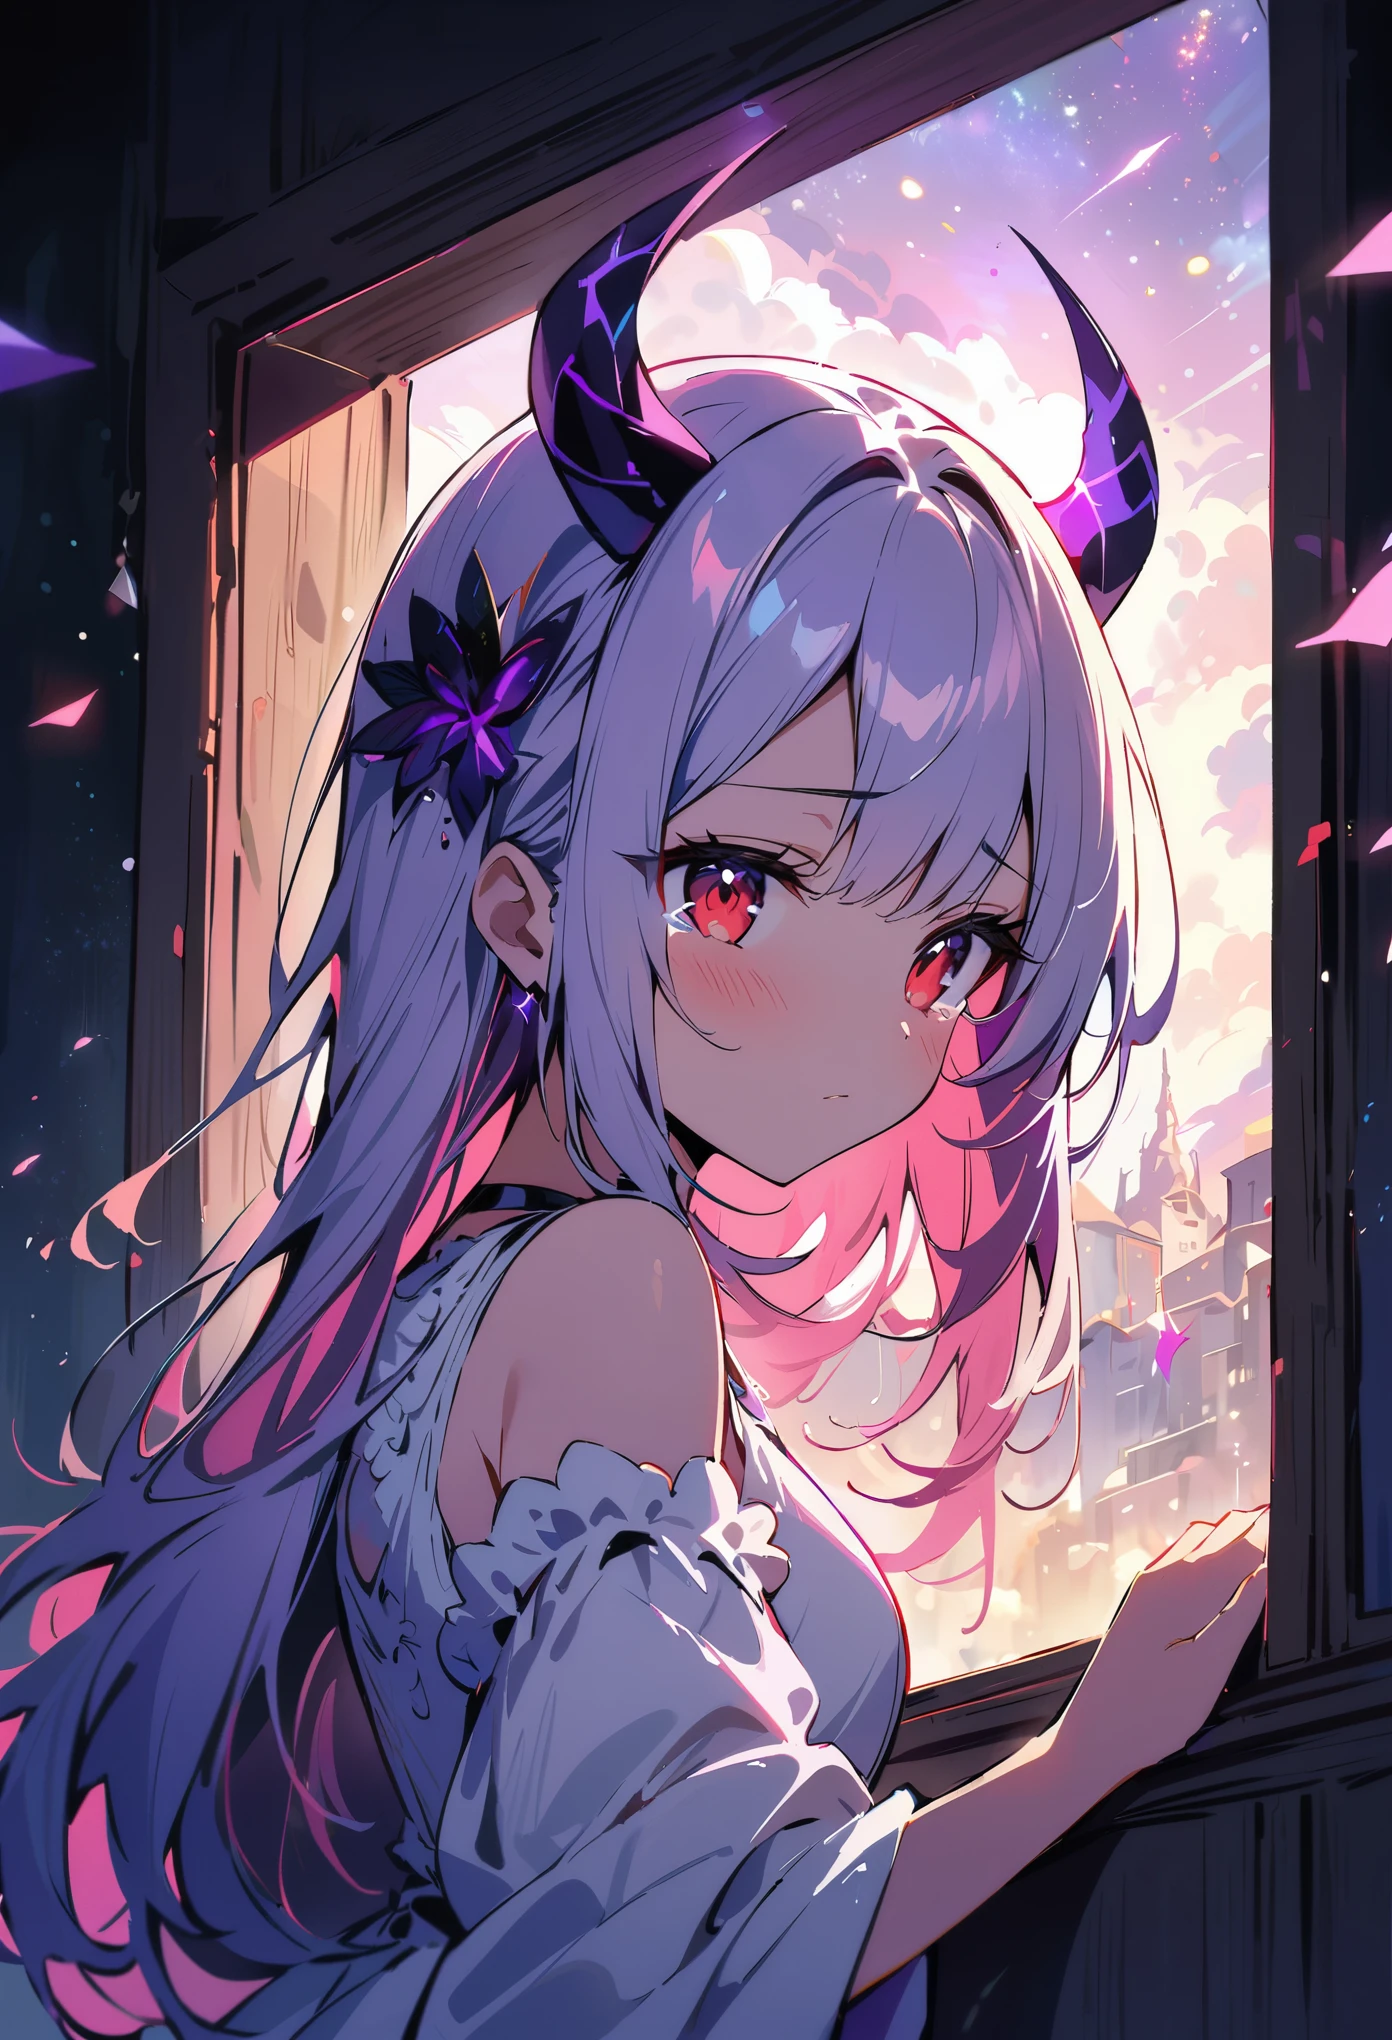 (best quality, masterpiece:1.2), 1girl, big red eyes,decend eyelids,brimming with tears, white long hair,white dress, Purple 2horns on head, Purple demon tail, blush,full body,gaze at the stars outside the window, cinematic lighting effects, particle light effects, portrait, ethereal colors, surreal atmosphere, delicate brushwork, dream-like scenery